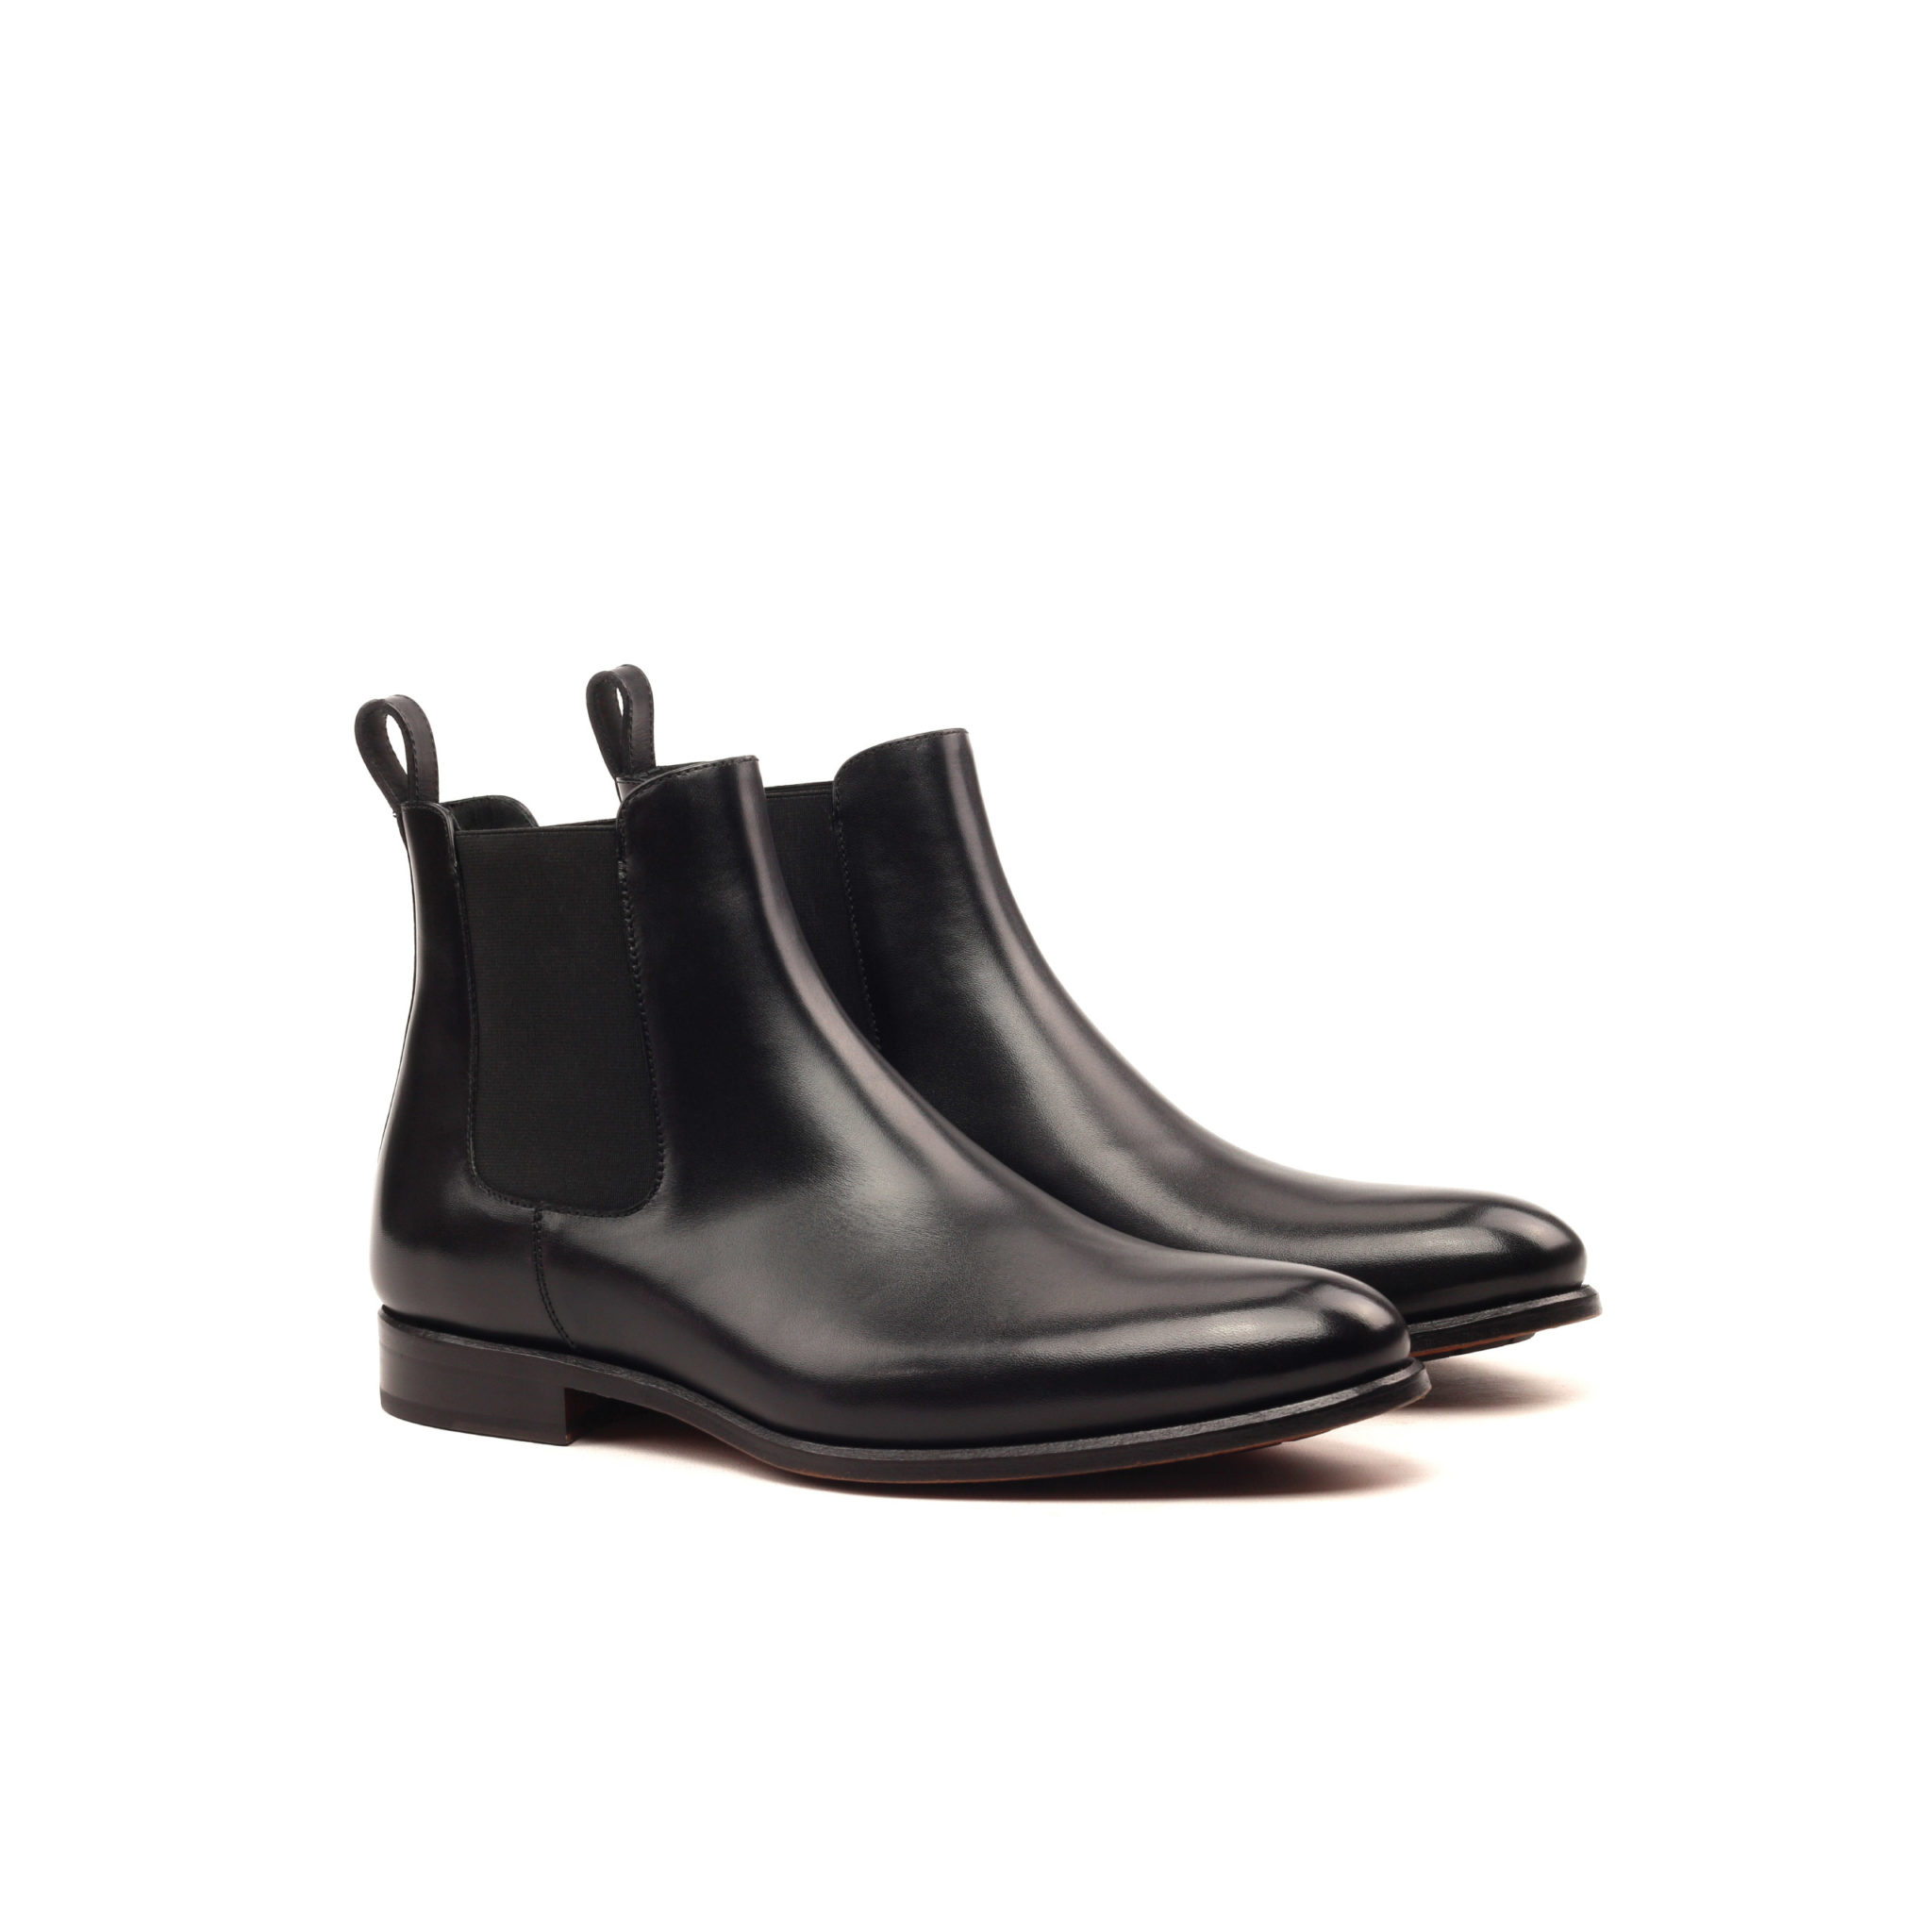 Ernest Chelsea Boot Black Box Calf - People of the Seine